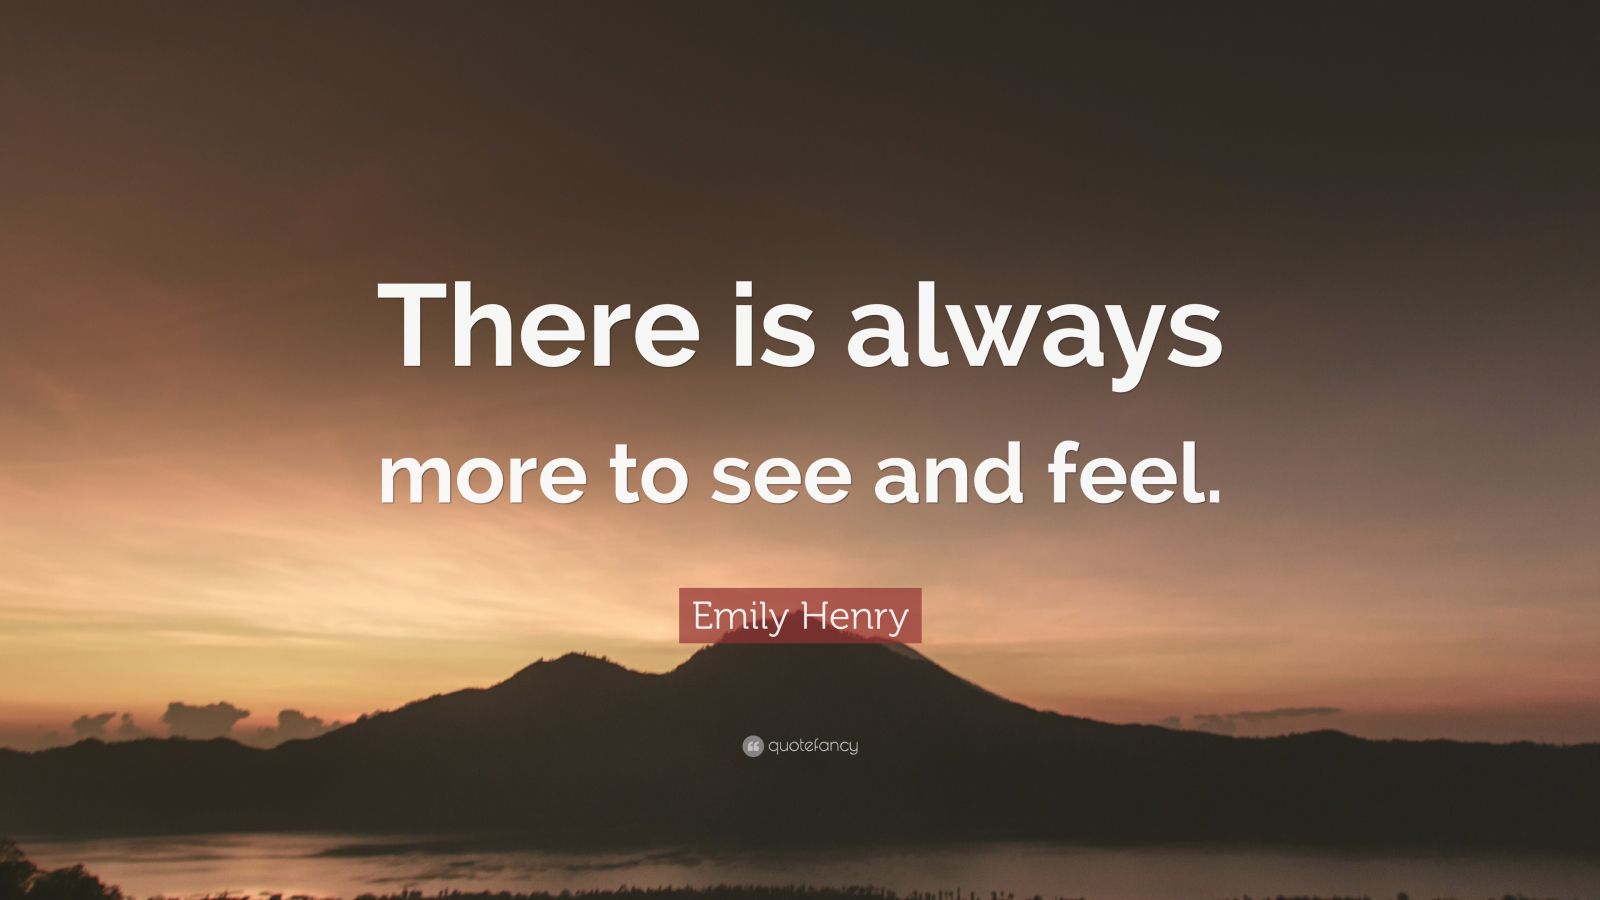 Top 90 Emily Henry Quotes | 2021 Edition | Free Images - QuoteFancy